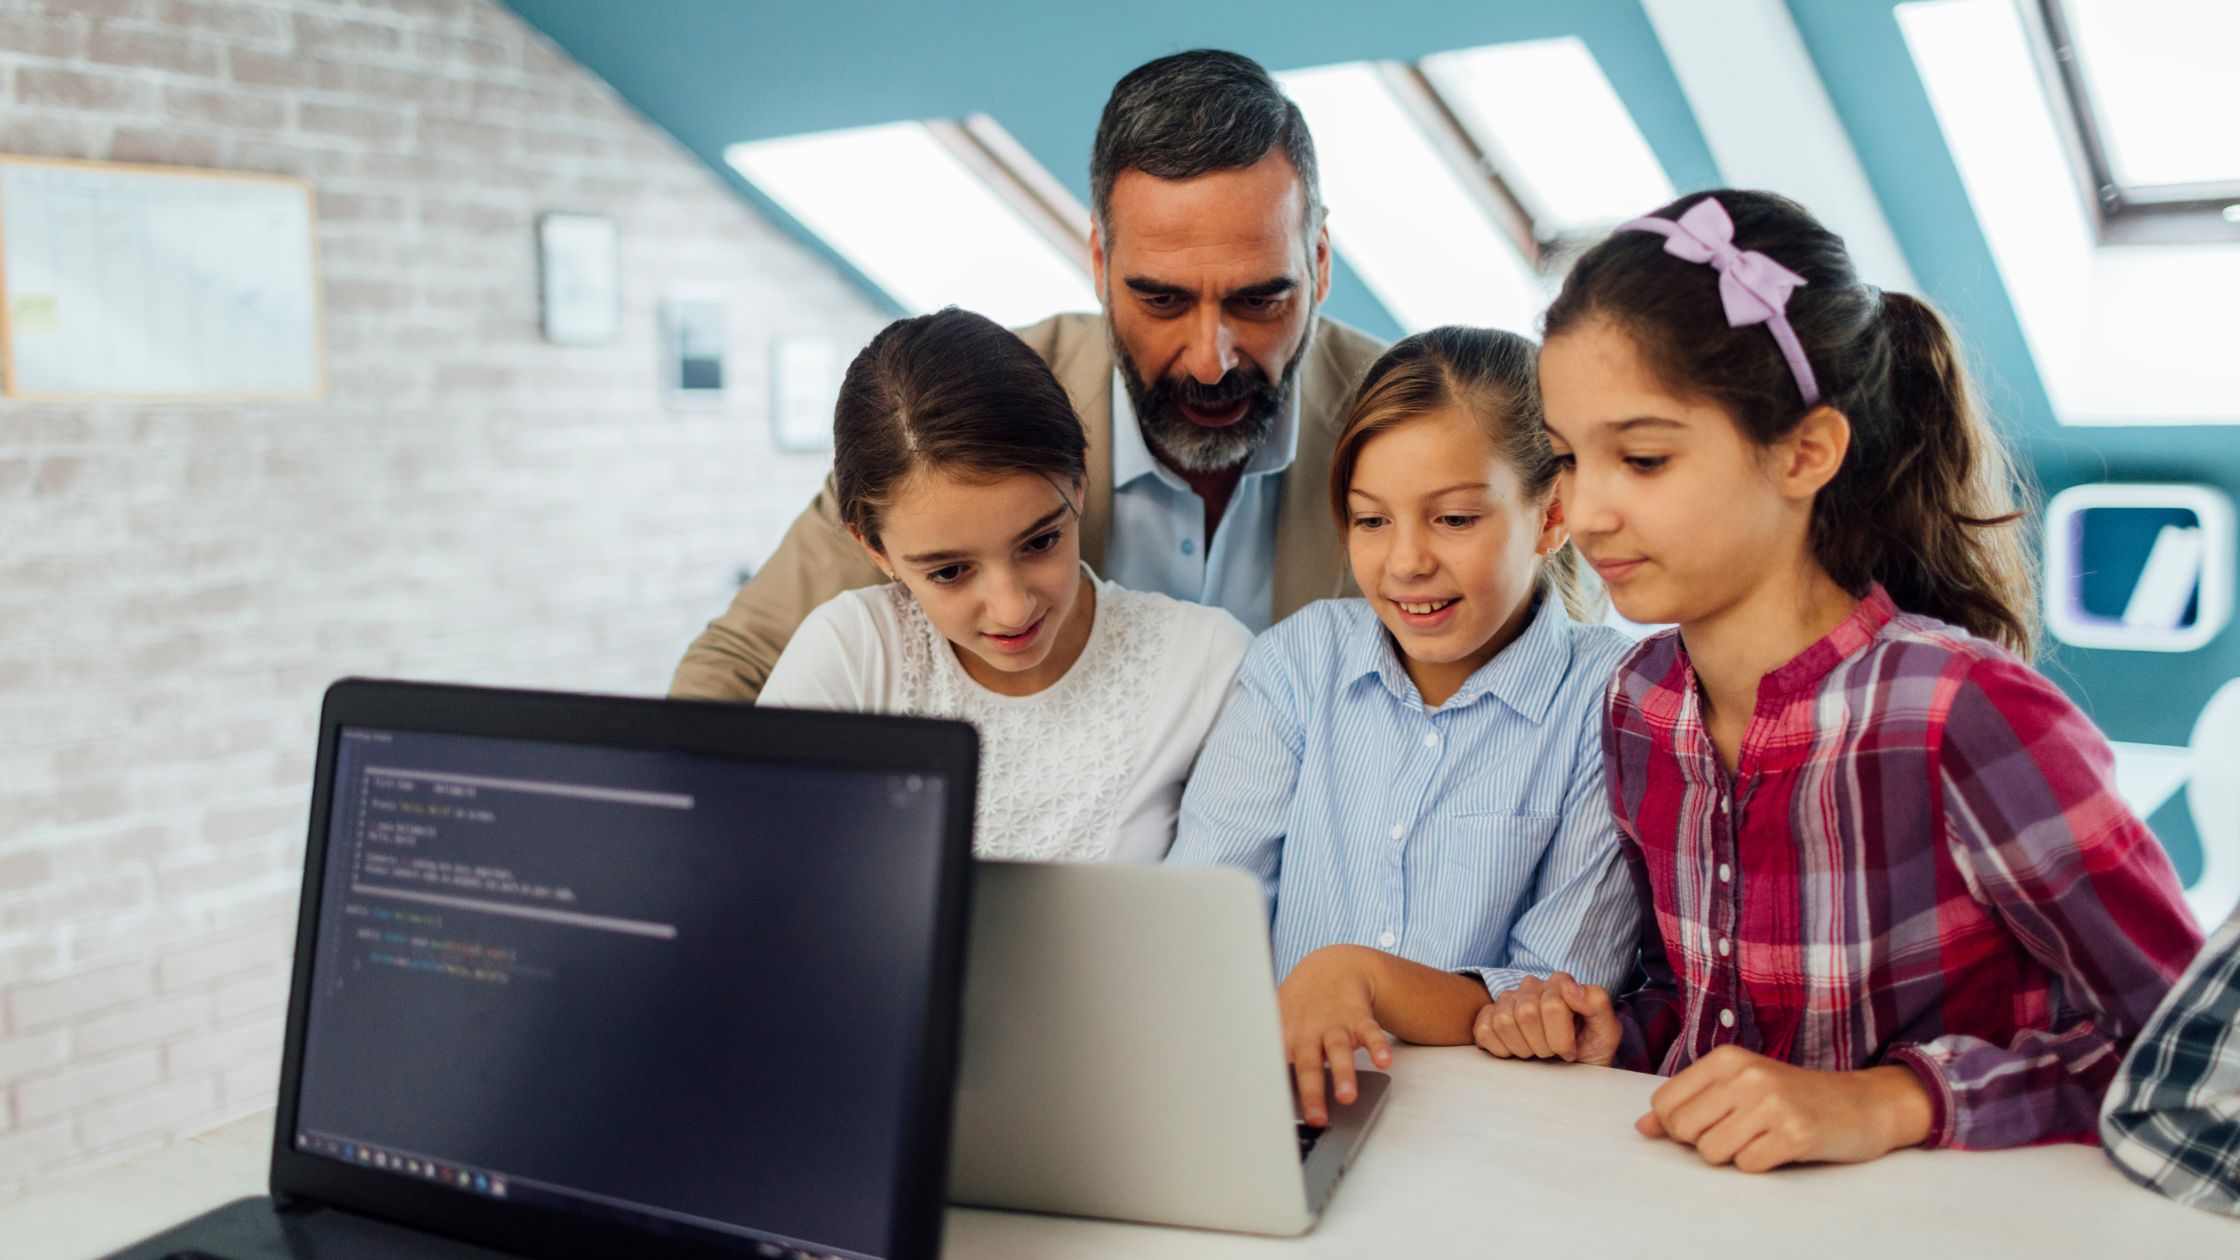 Kids Coding projects